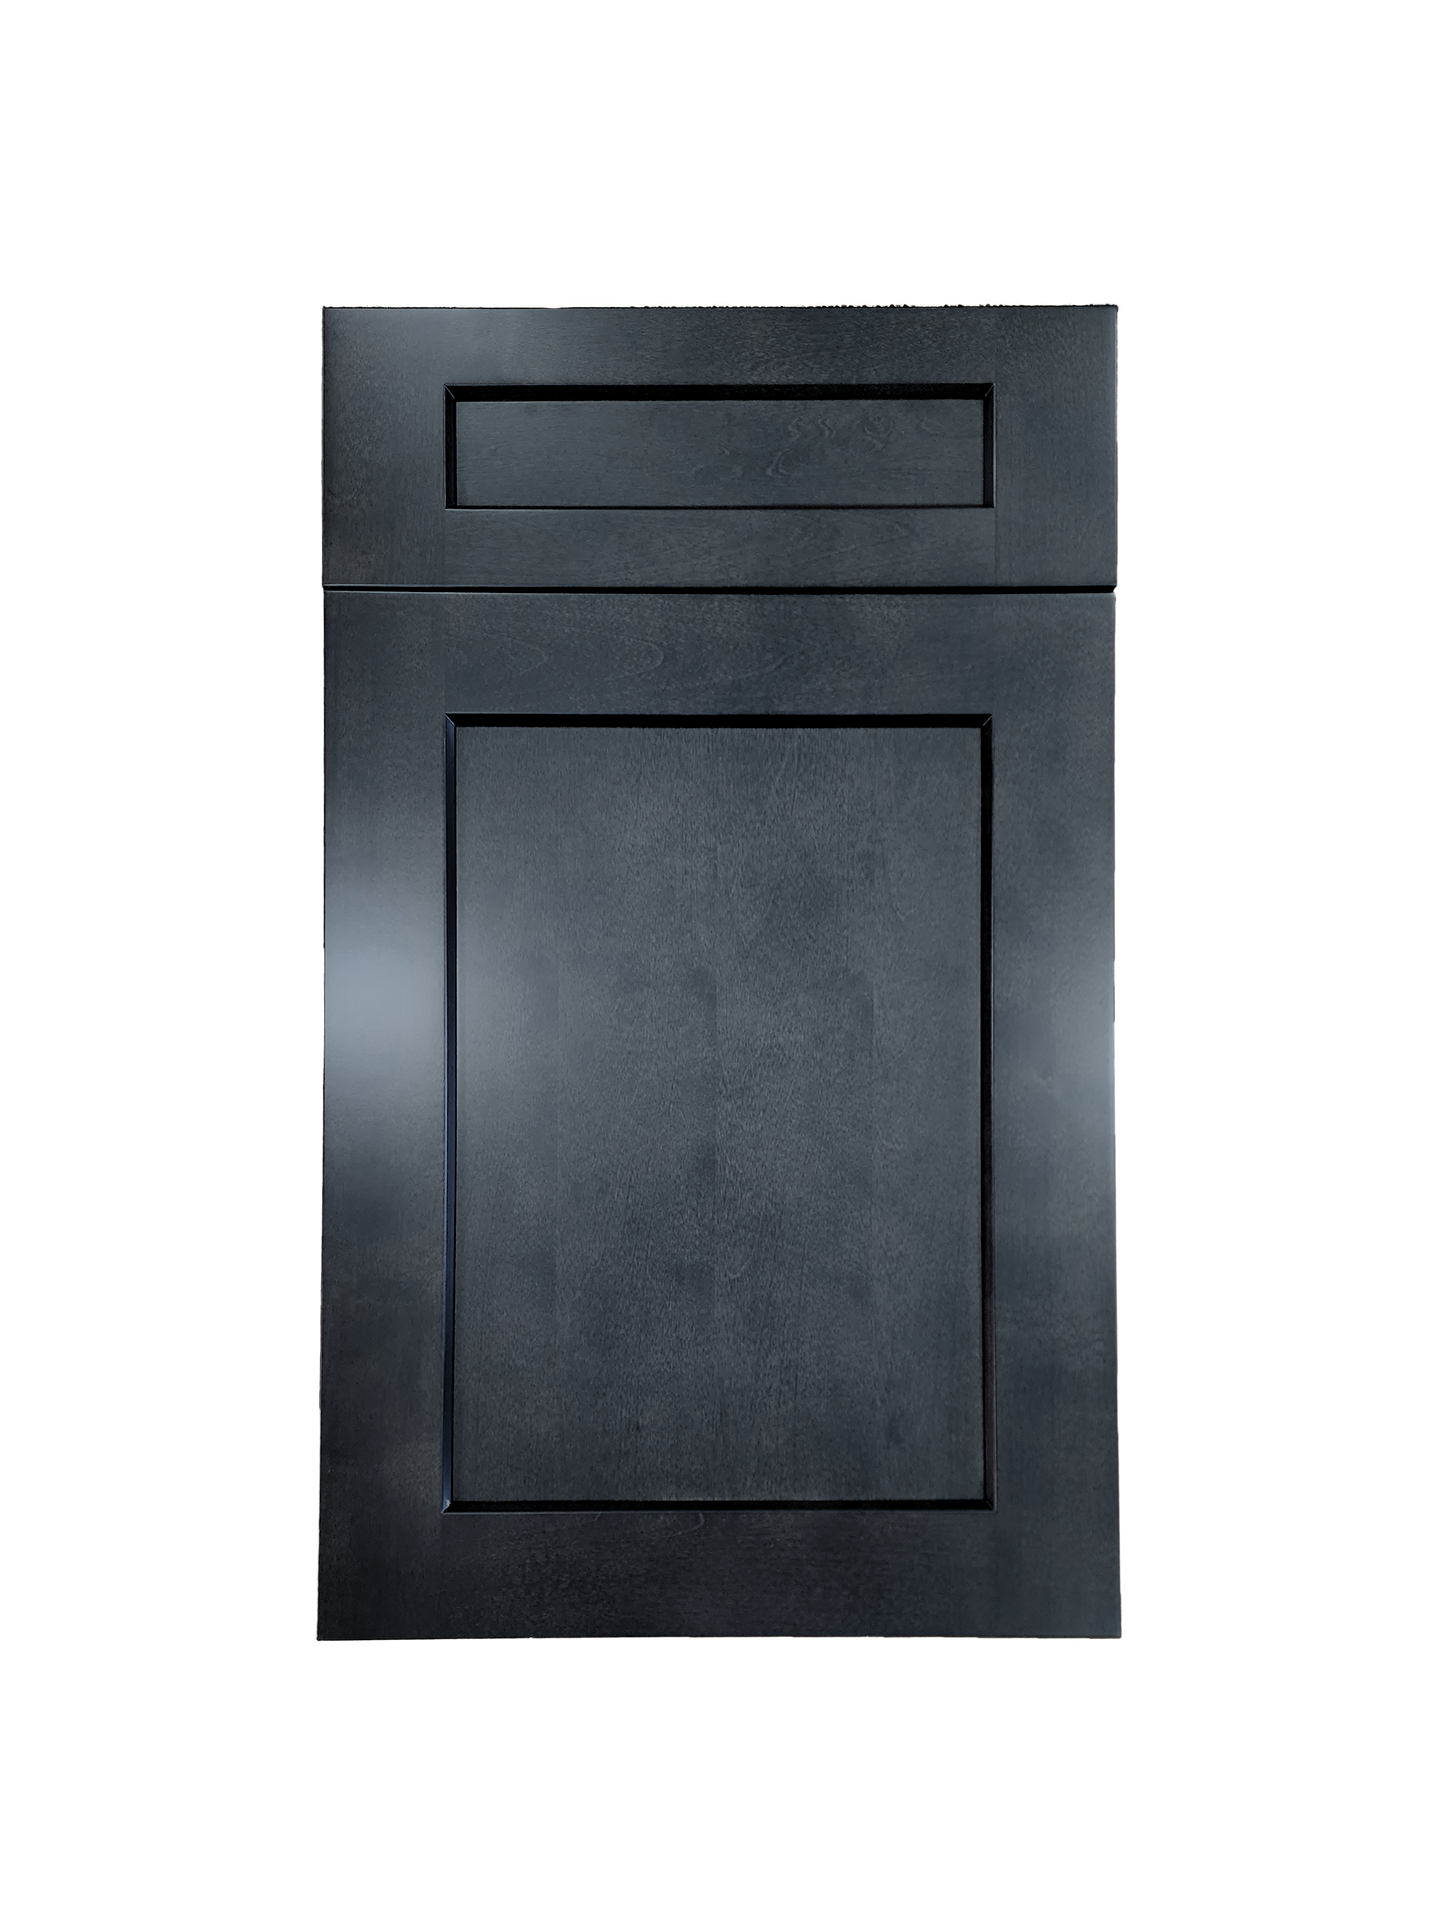 Stormy Grey Base Cabinet 9 inches wide 24 inches deep 34.5 inches tall with Stormy Grey box and Stormy Grey doors